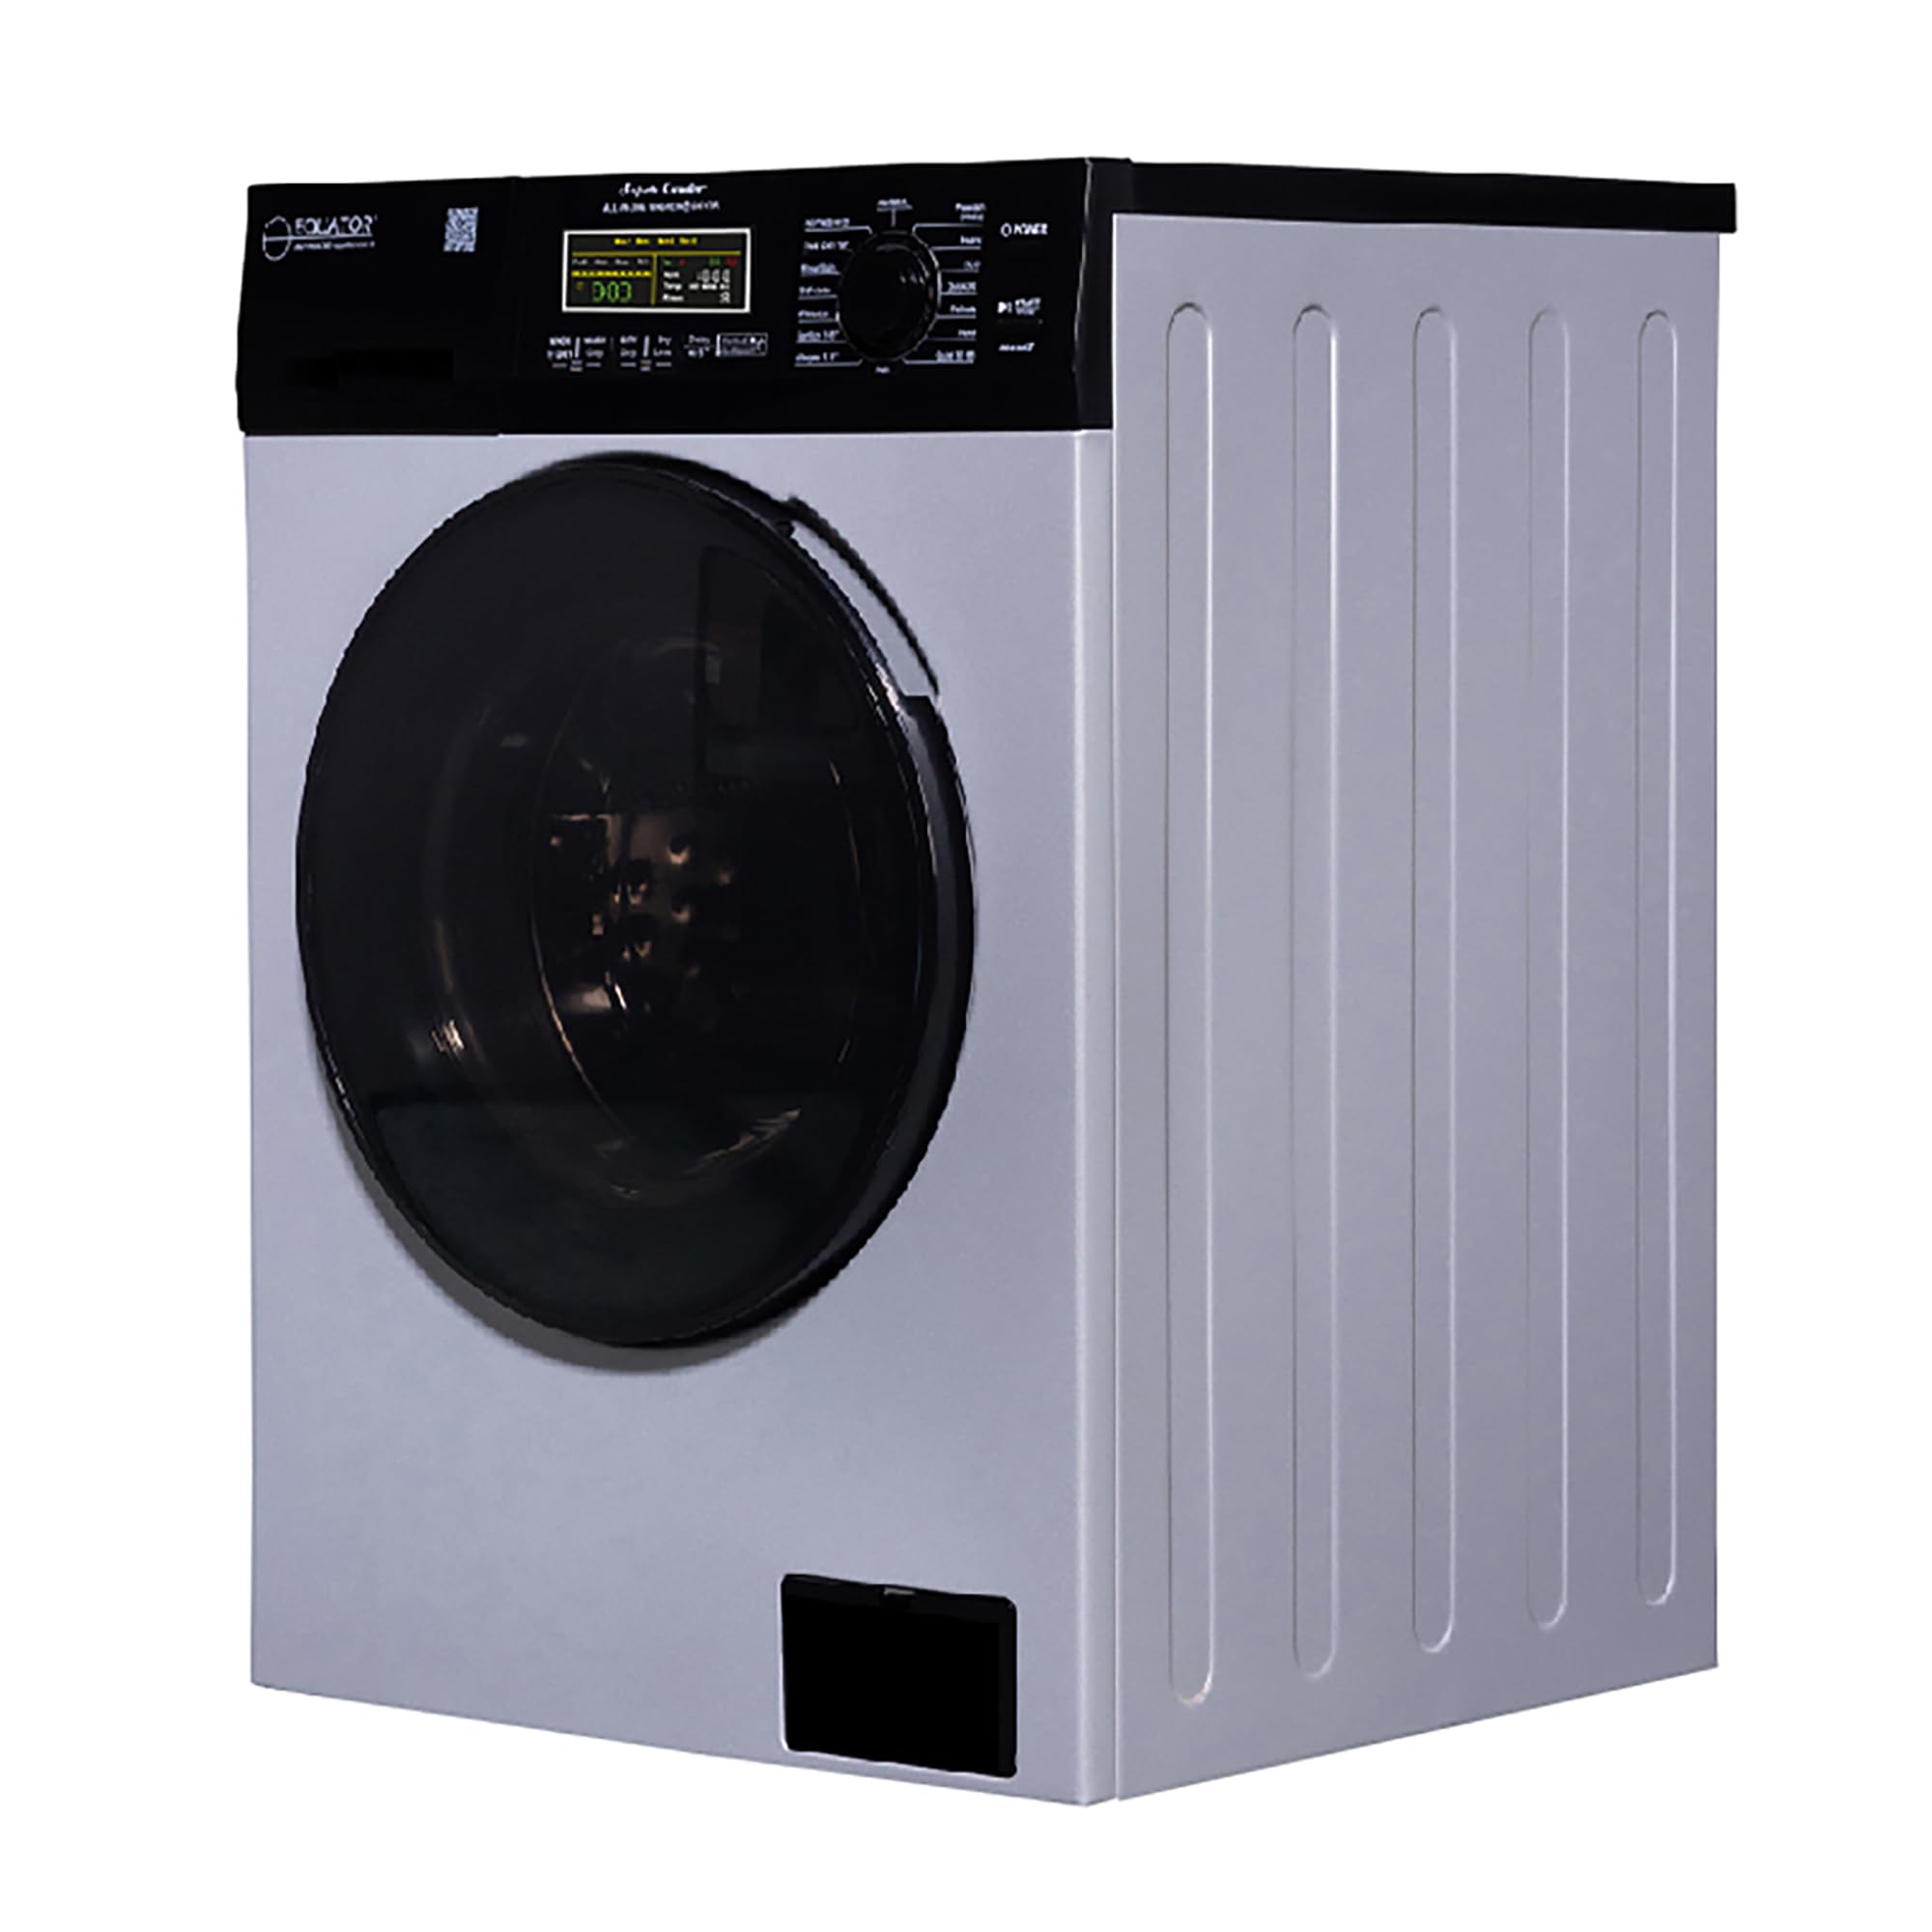 Equator Ver3 Combo Washer Vented/Ventless Dry-1400RPM Color Coded Display Silver/Black